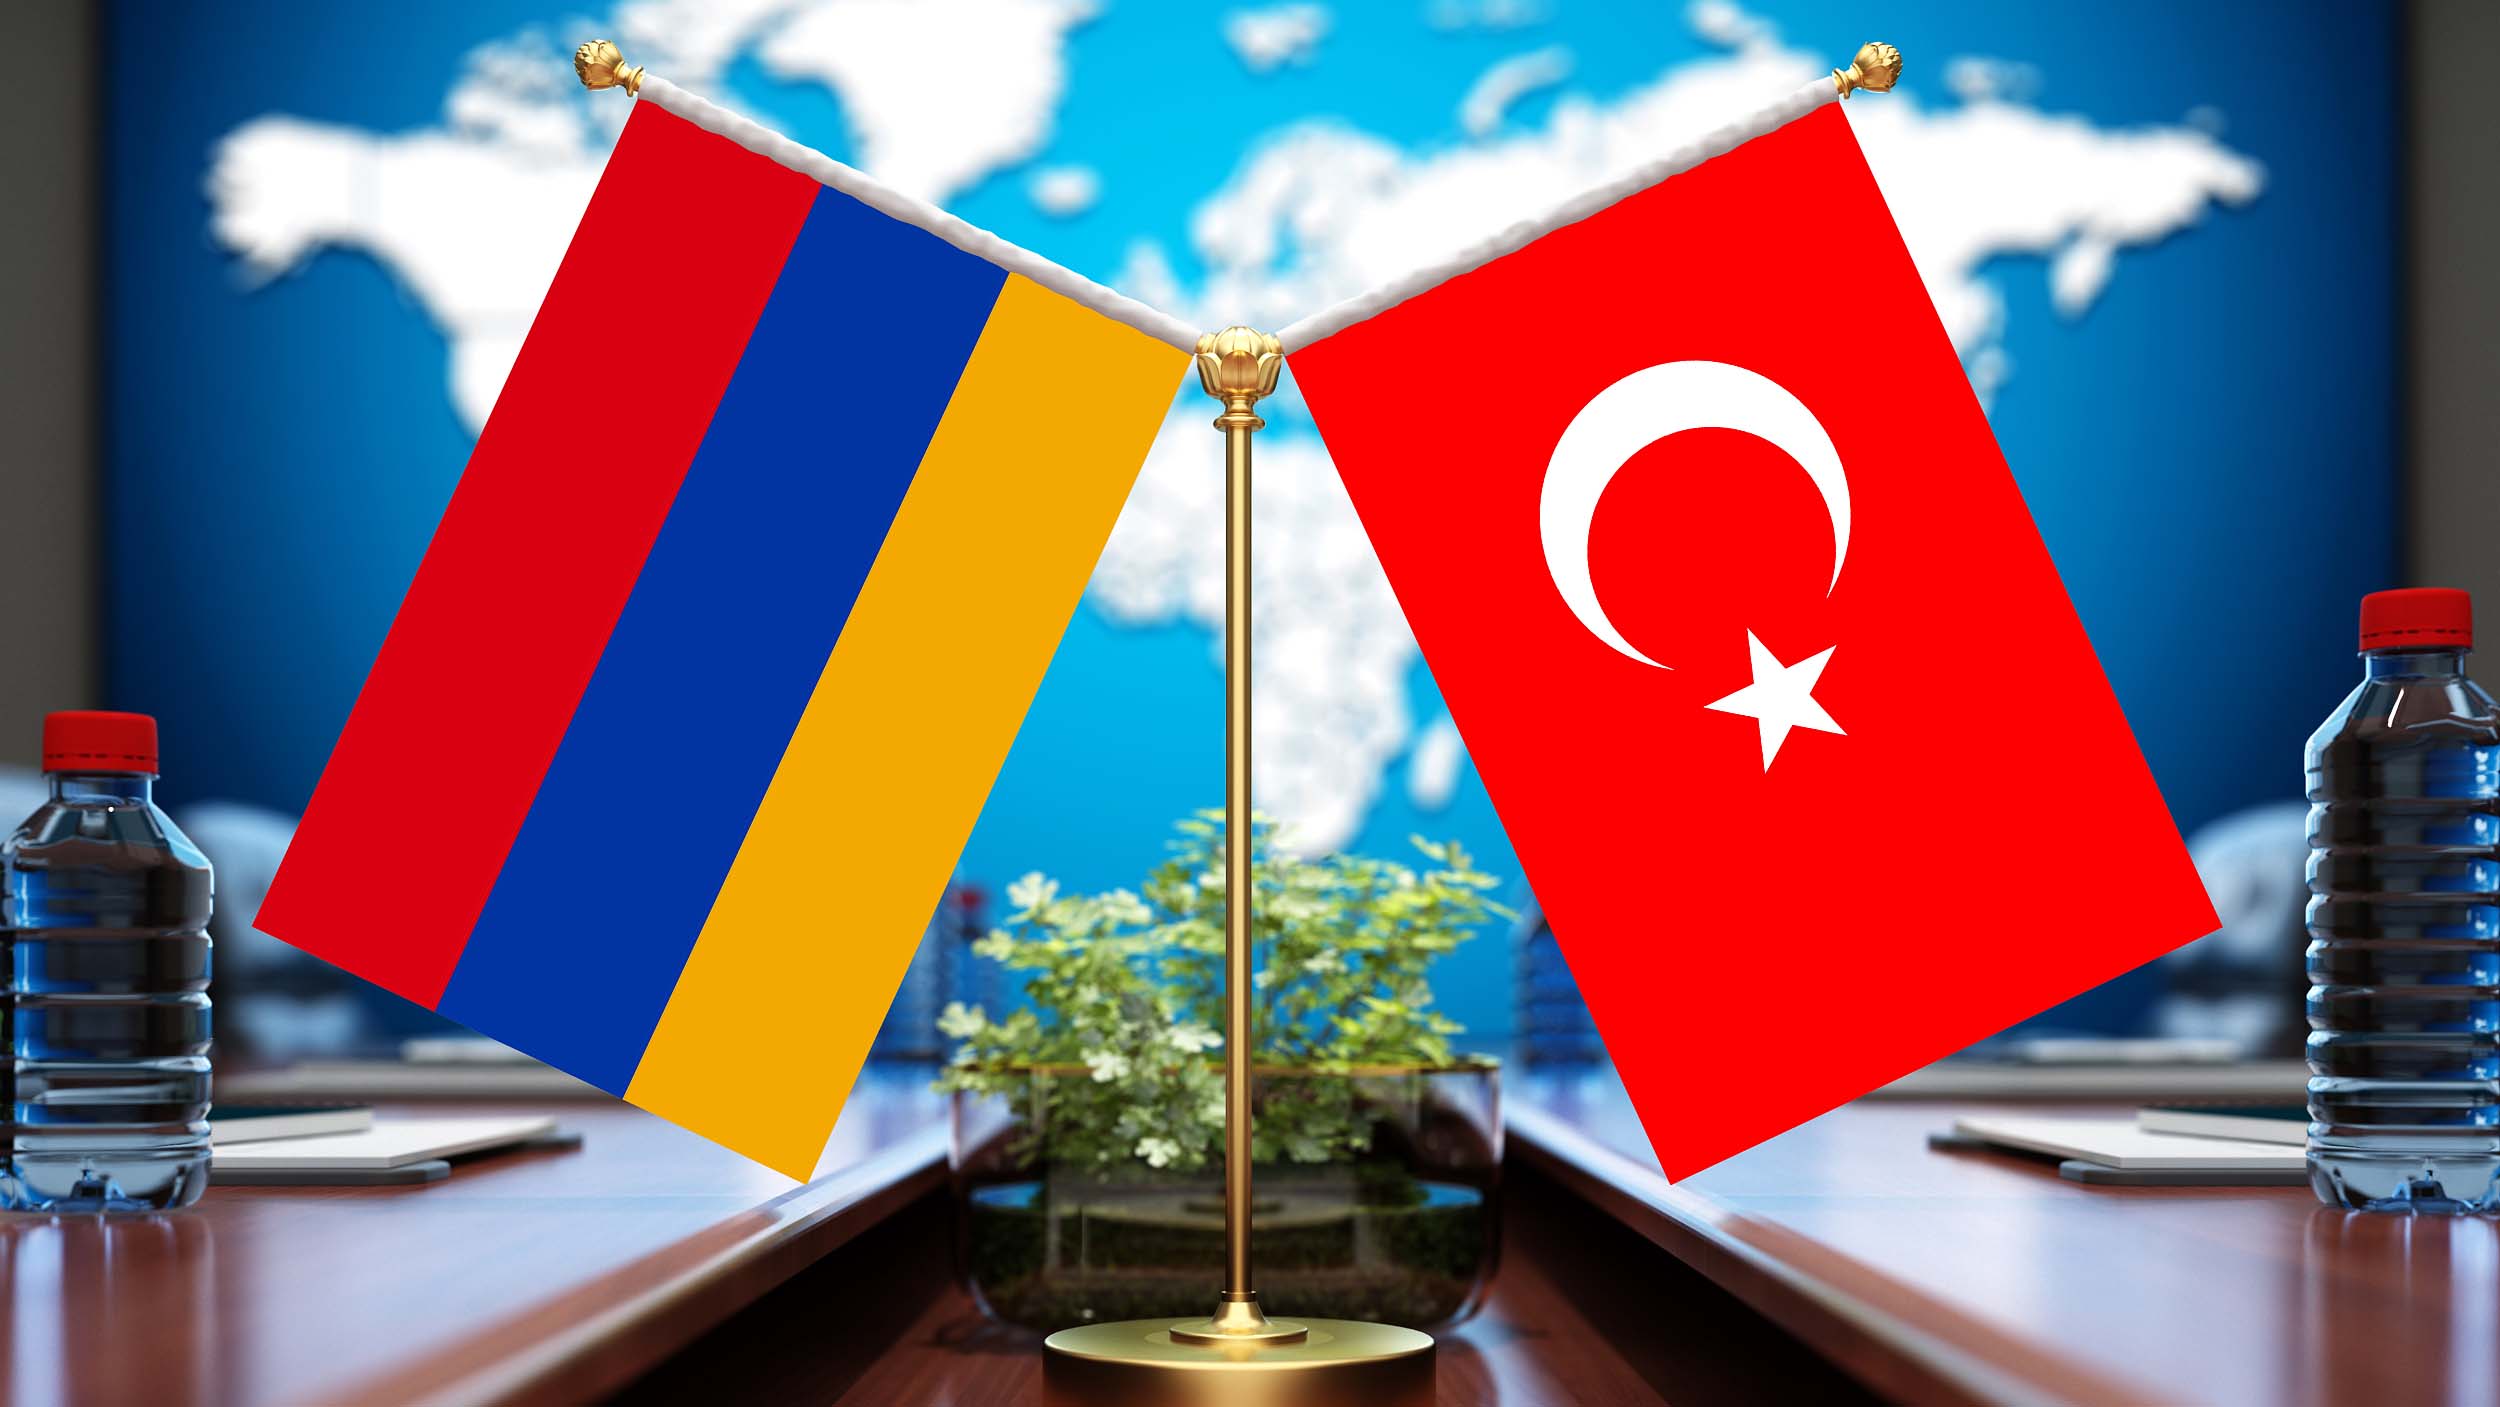 Turkey, Armenia to mutually appoint envoys to normalize ties - CGTN